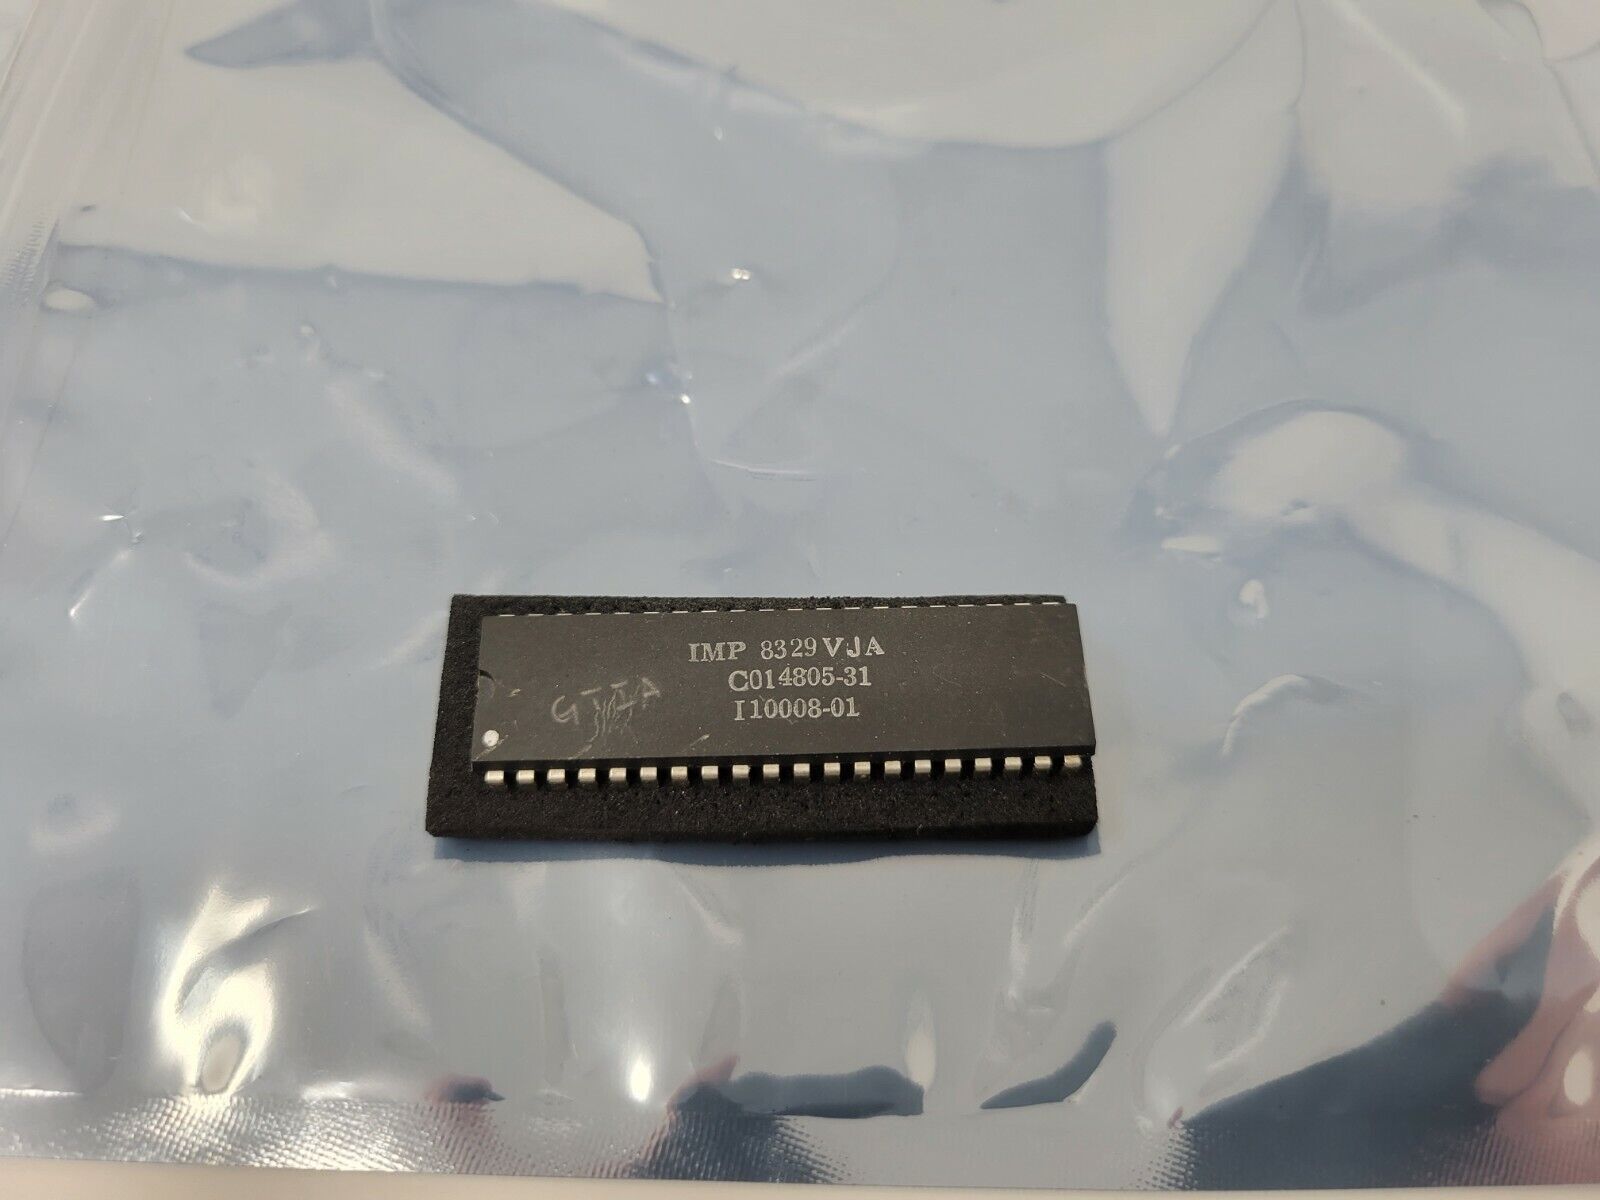 1 x Atari C014805 GTIA IC Chip pulled from Atari 5200 Console TESTED WORKING